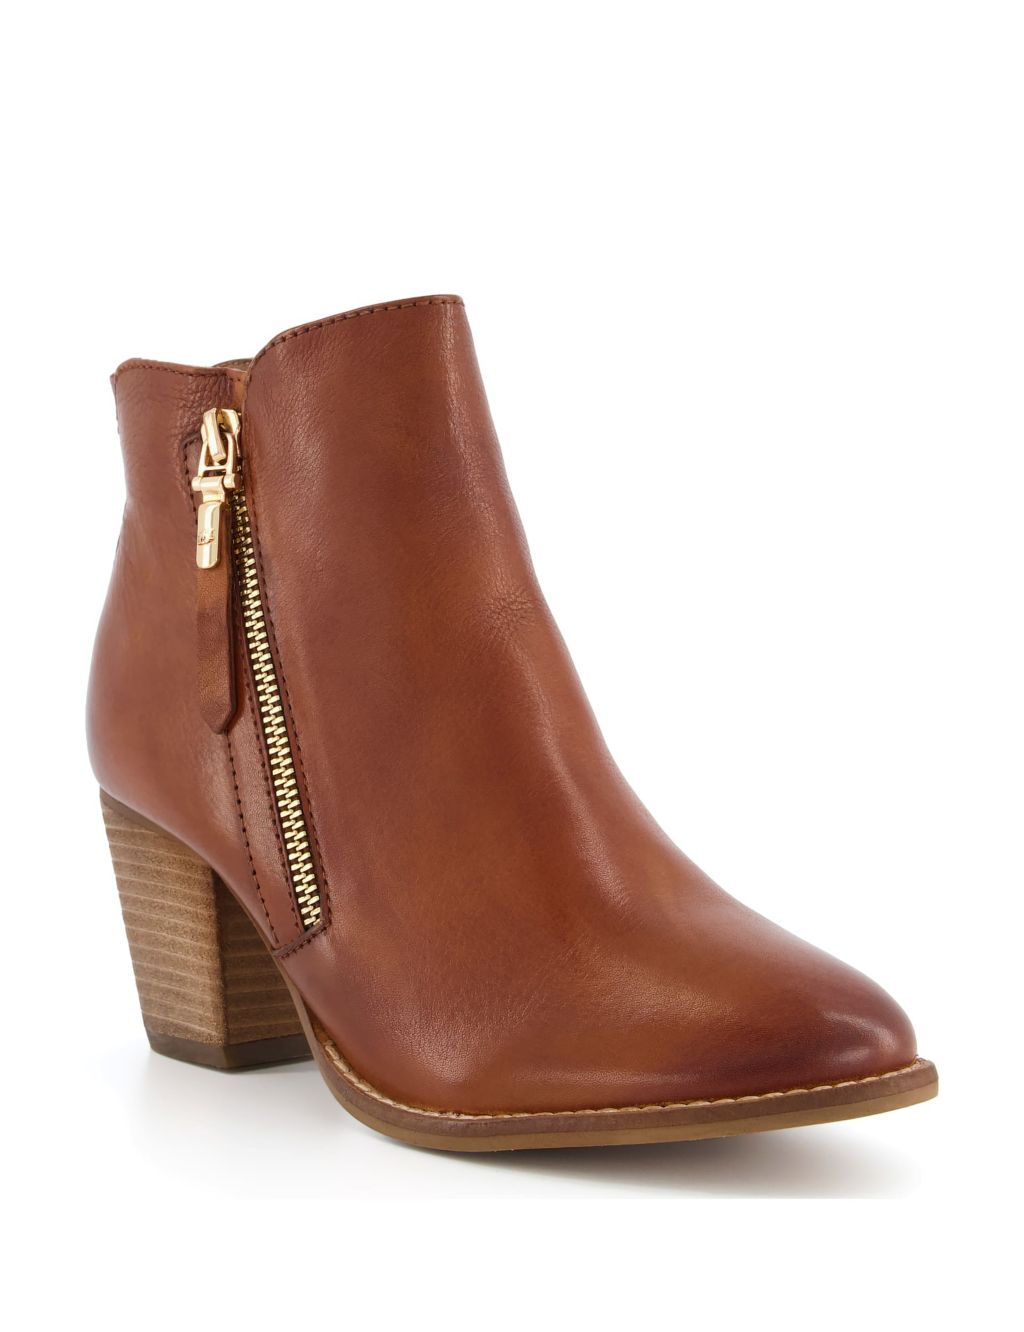 Leather Block Heel Ankle Boots image 2